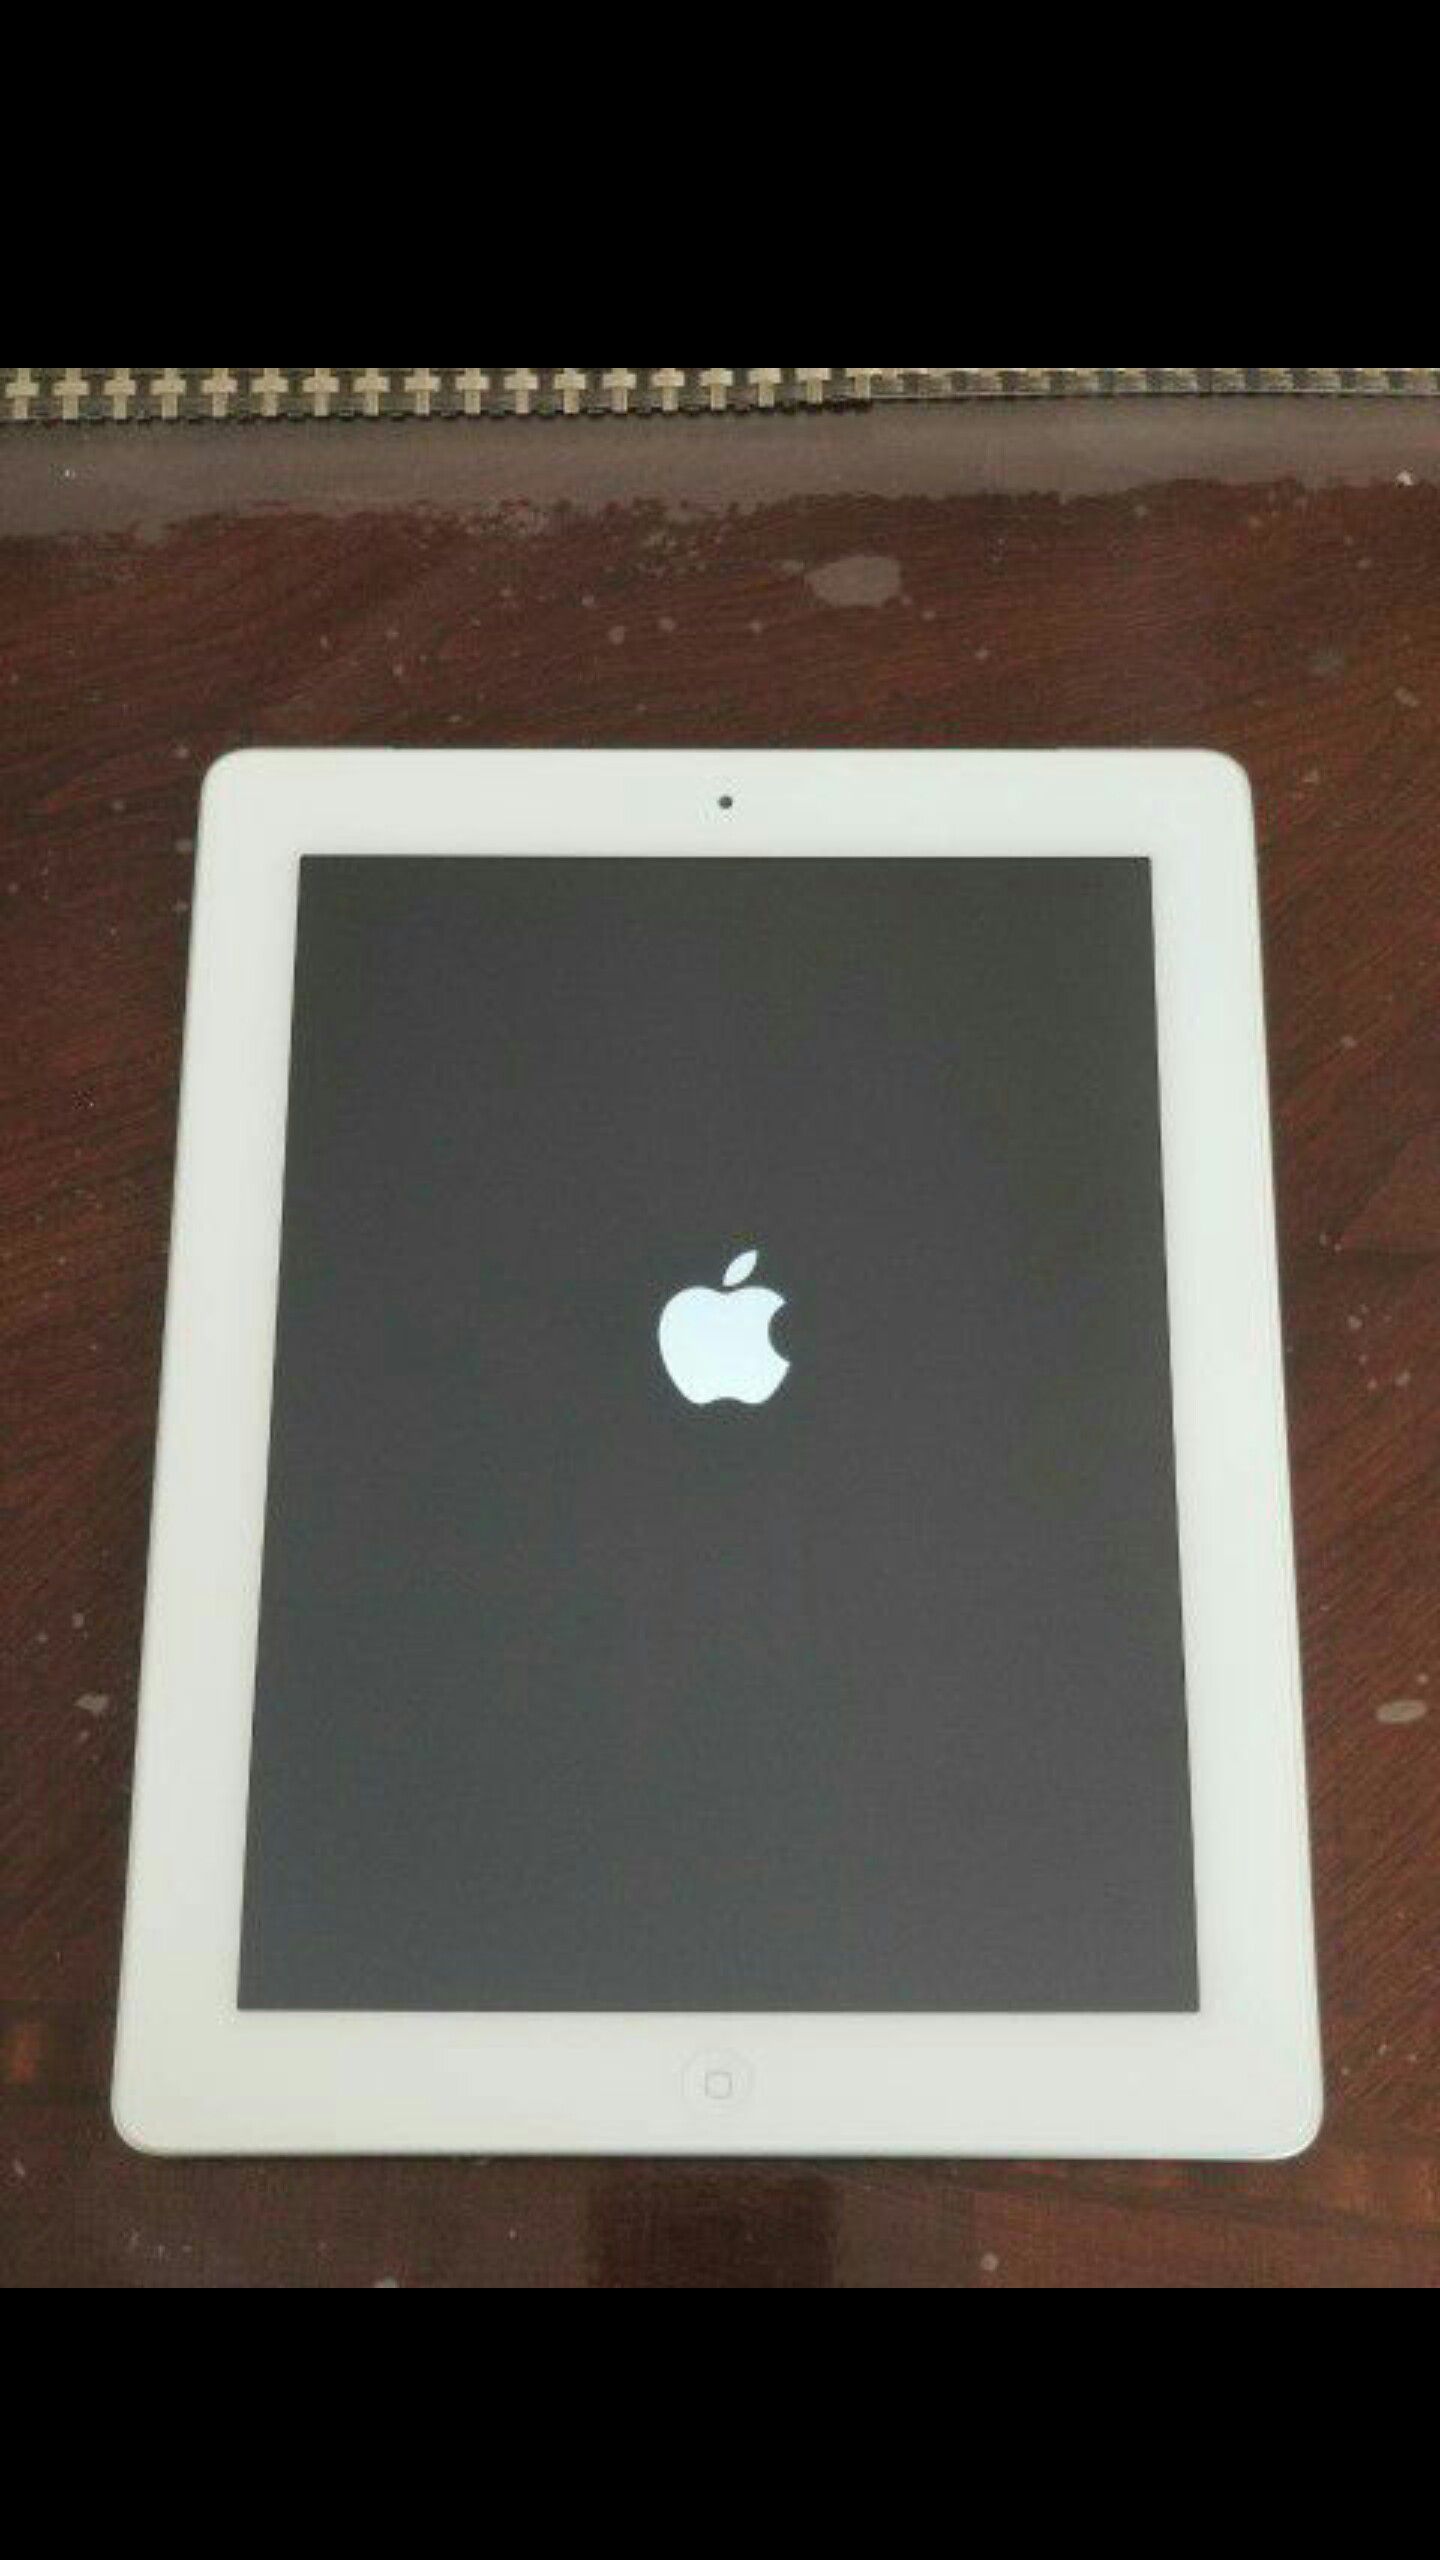 IPad 3rd generation, Cellular and Wi-Fi Internet access, UNLOCKED, Usable with Wi-Fi and SIM, Excellent condition